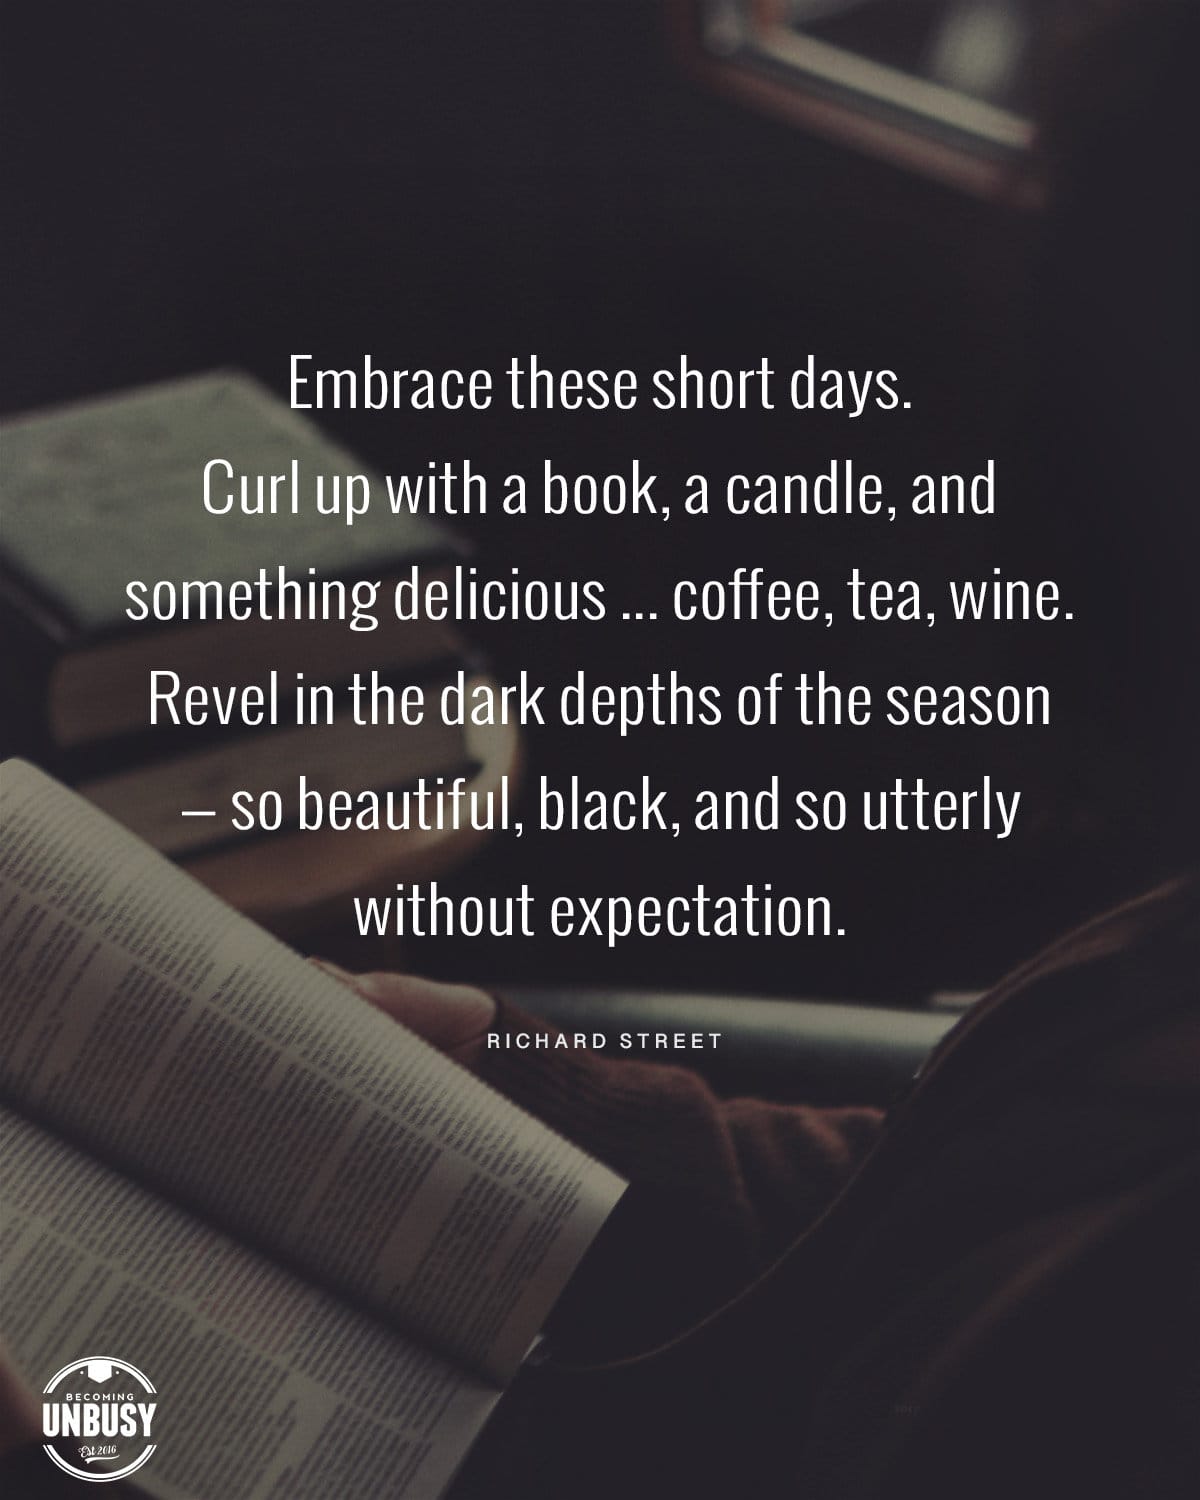 The following fall bucket list quote written over a photo of a woman reading in the dark lamp side, "Embrace these short days. Curl up with a book, a candle, and something delicious ... coffee, tea, wine. Revel in the dark depths of the season — so beautiful, black, and so utterly without expectation." 